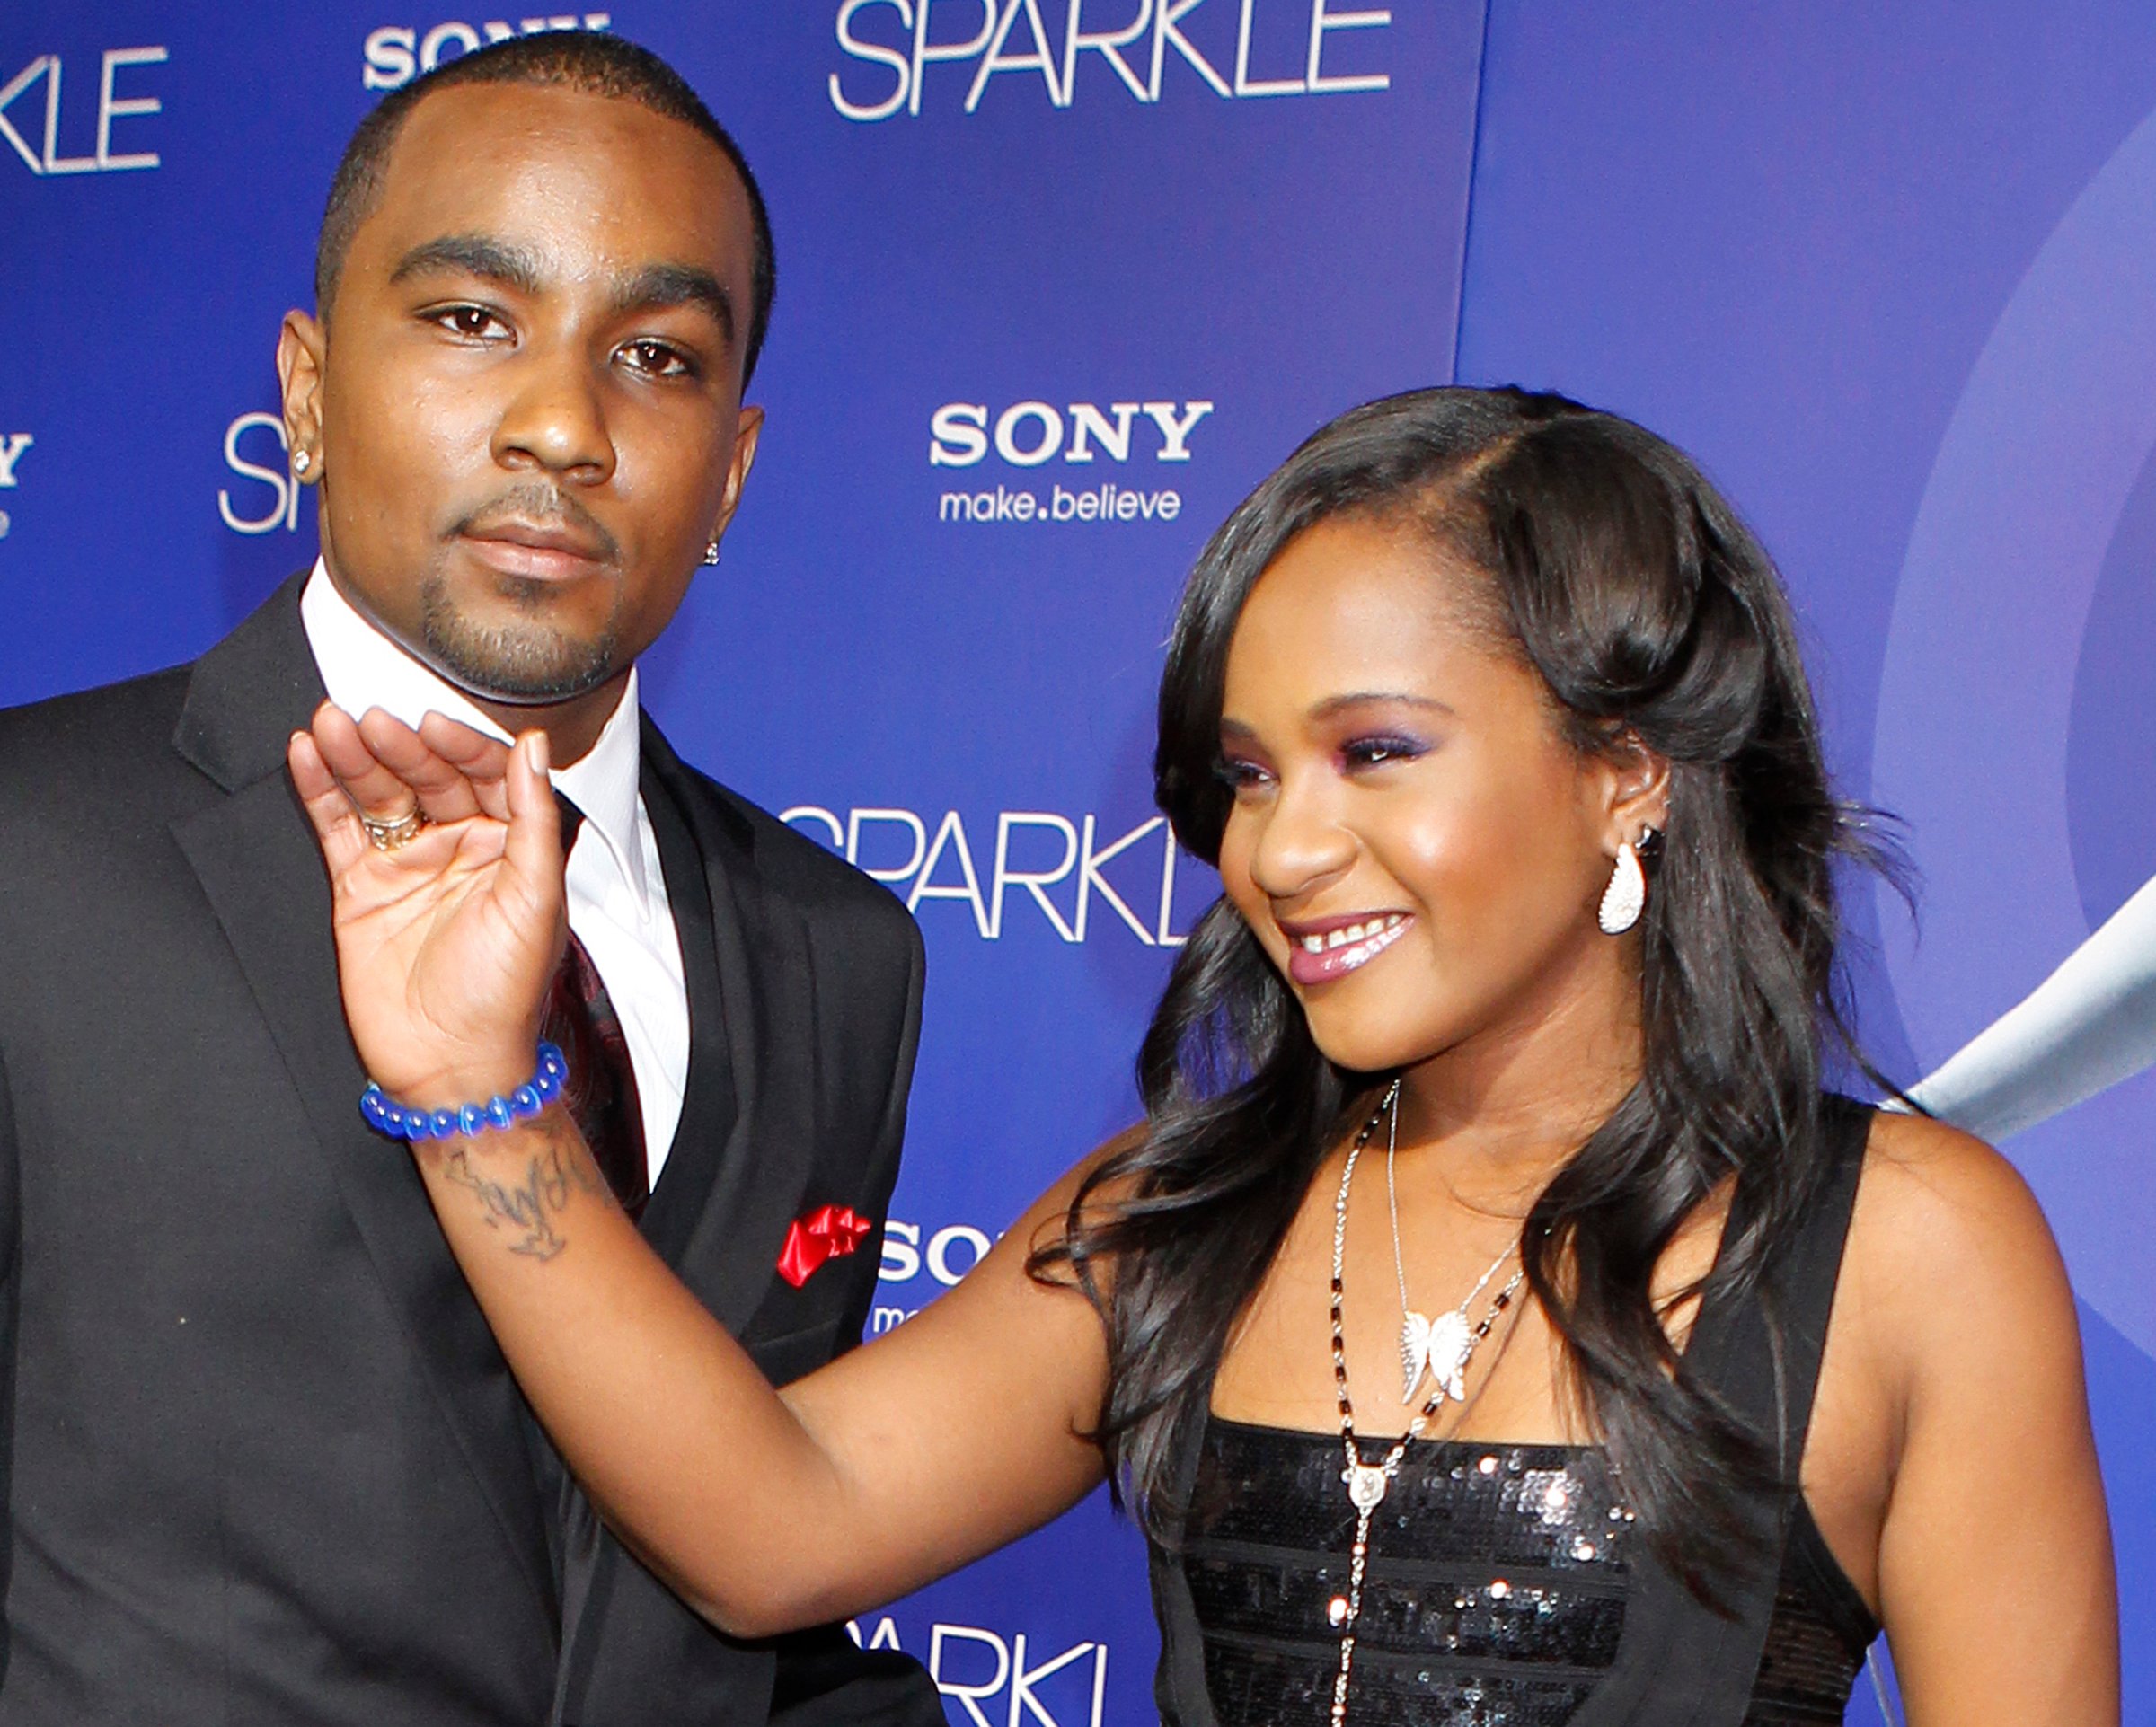 Bobbi Kristina Brown reveals a tattoo with the initials "W H" as she waves while arriving with boyfriend Nick Gordon at the premiere of the new film "Sparkle" starring Jordin Sparks and the late Whitney Houston in Hollywood